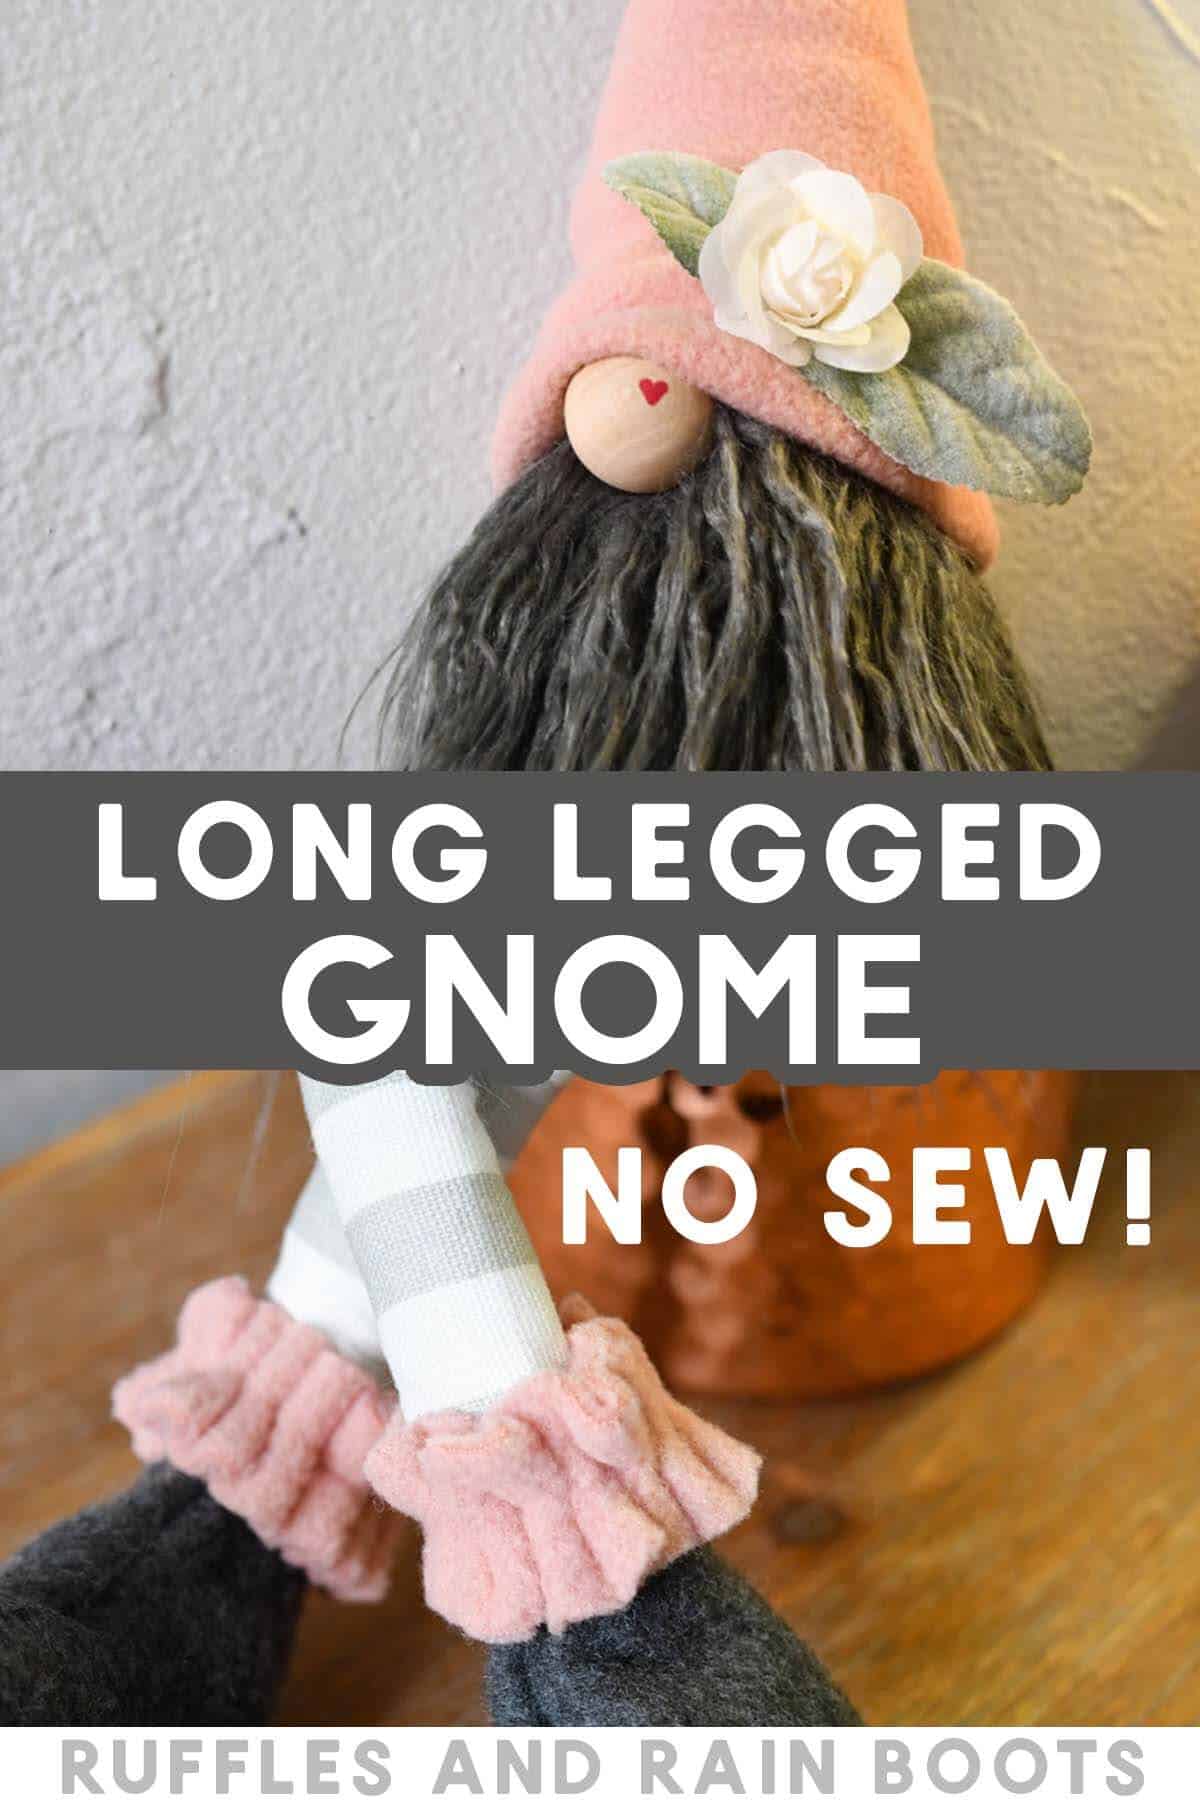 split image of gnome with long legs with text which reads long legged gnome no sew